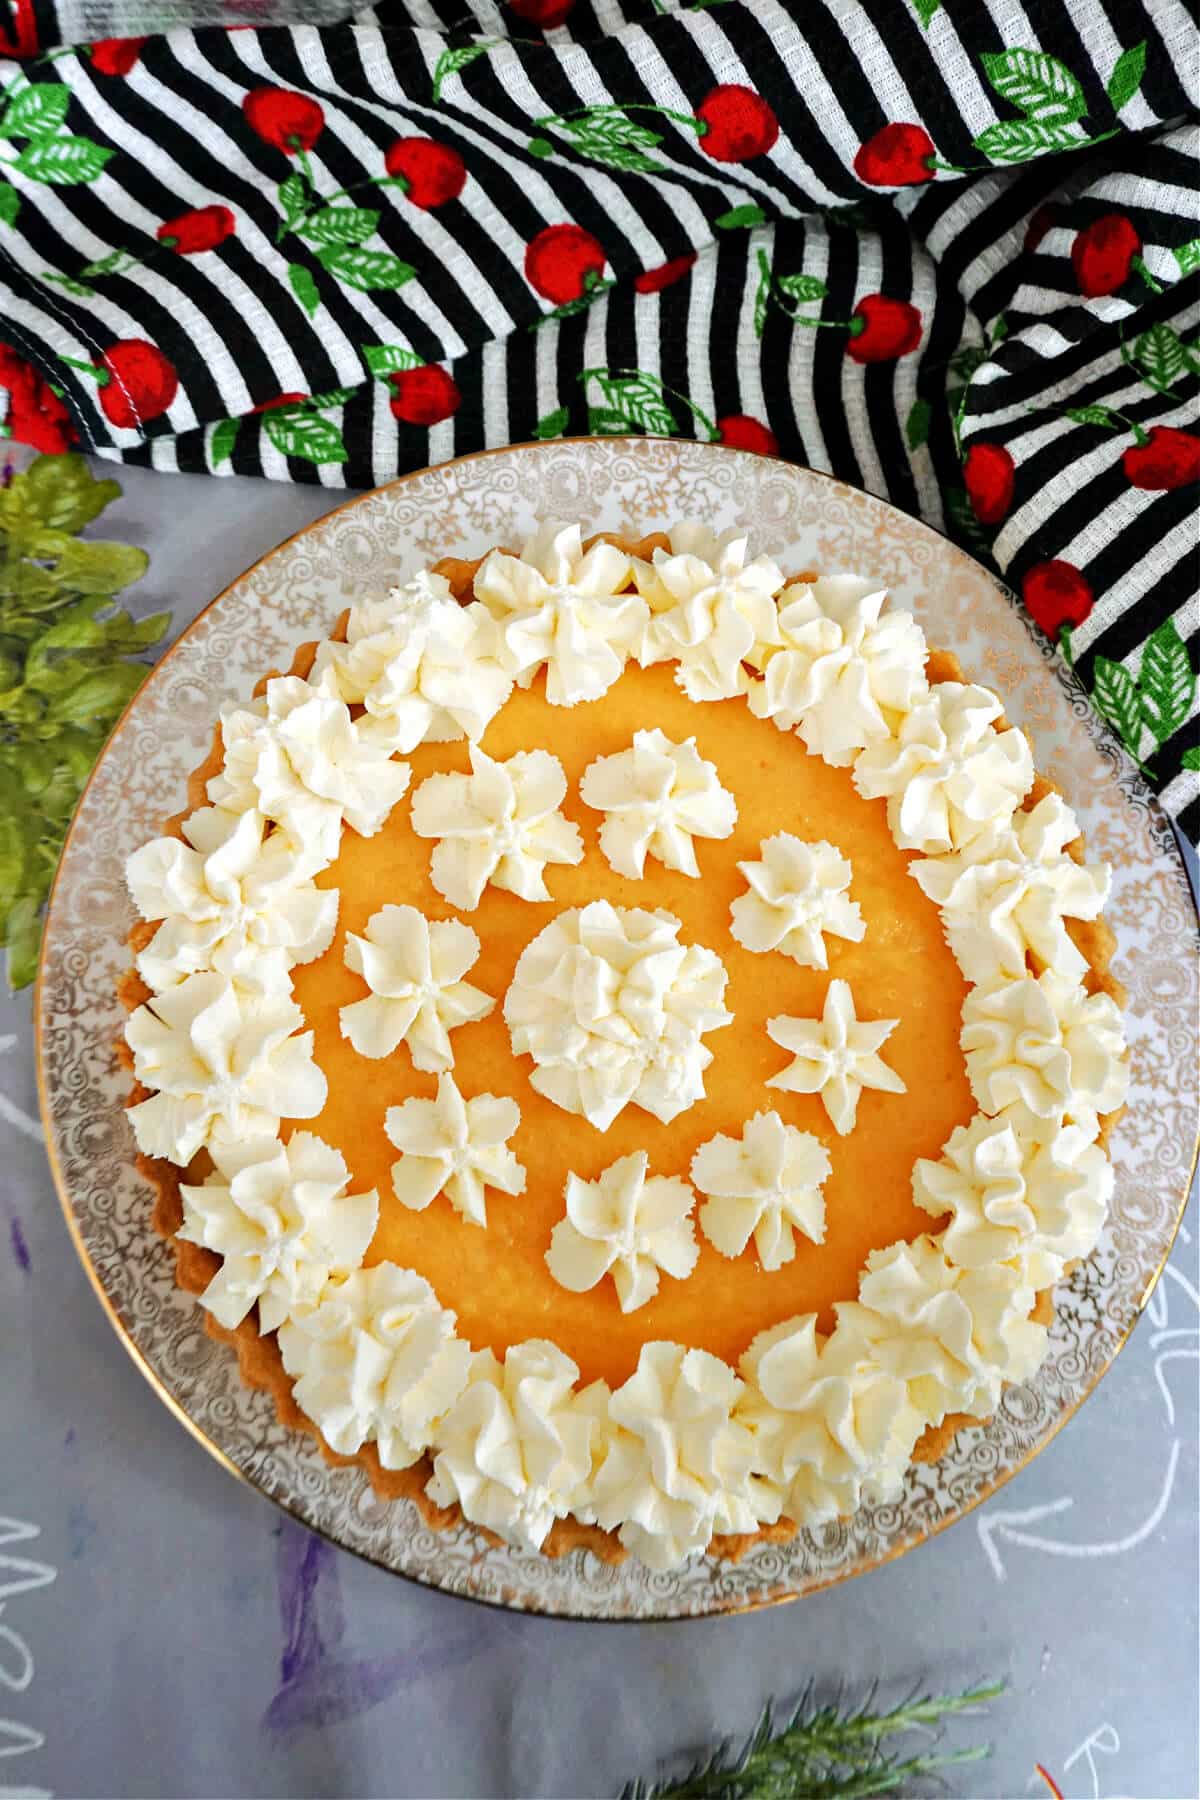 A cantaloupe pie decorated with cream.